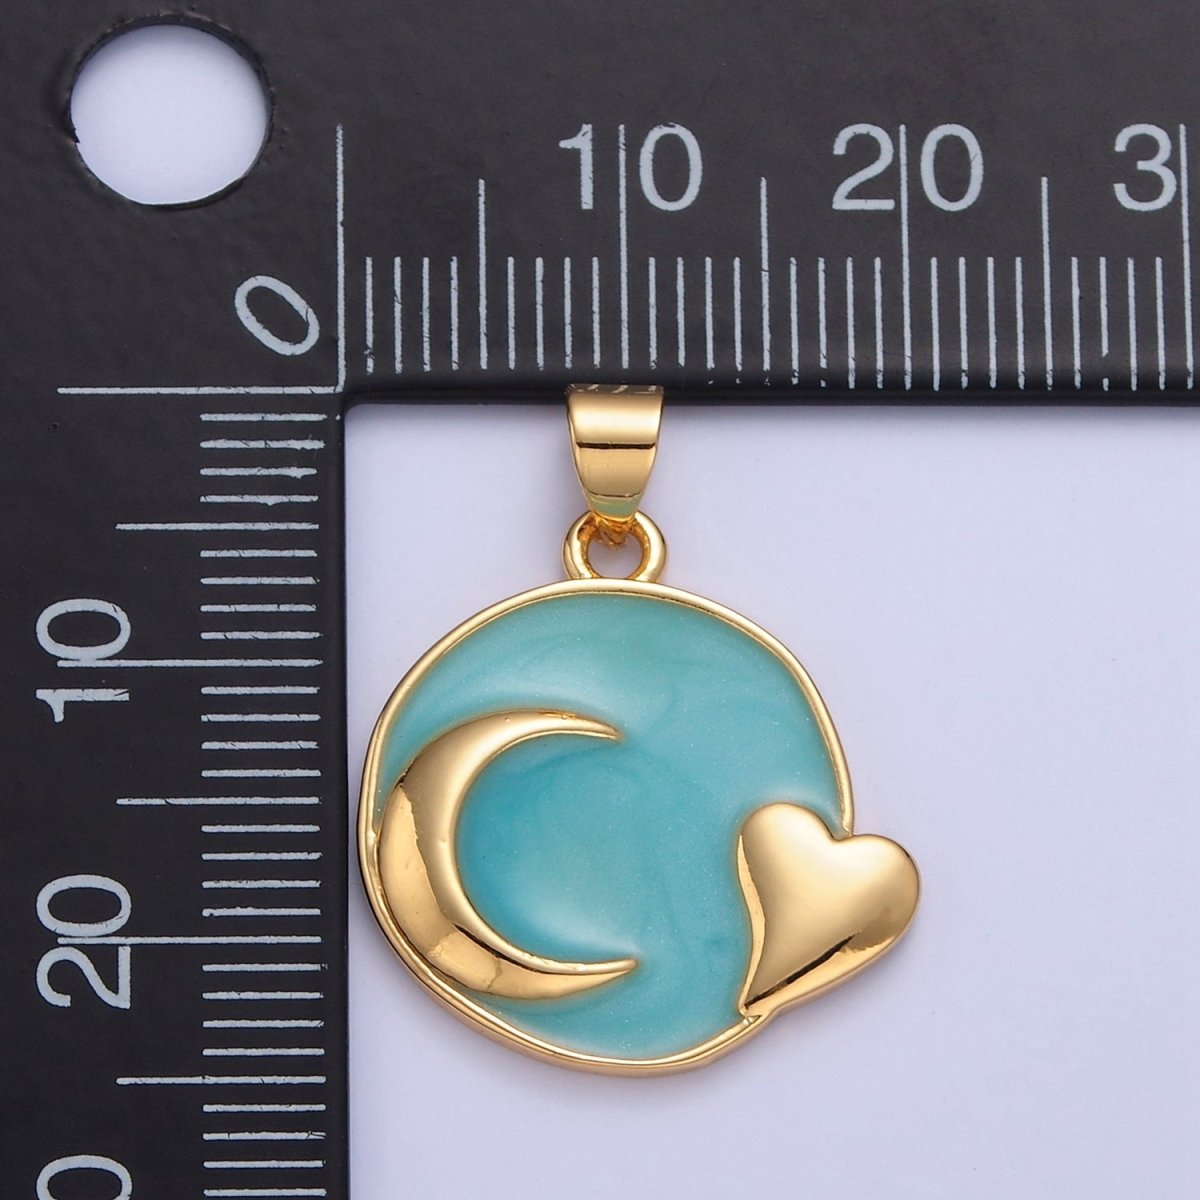 Dainty Round Teal Enamel Crescent Moon Heart Charm for Necklace Pendant I-311 - DLUXCA